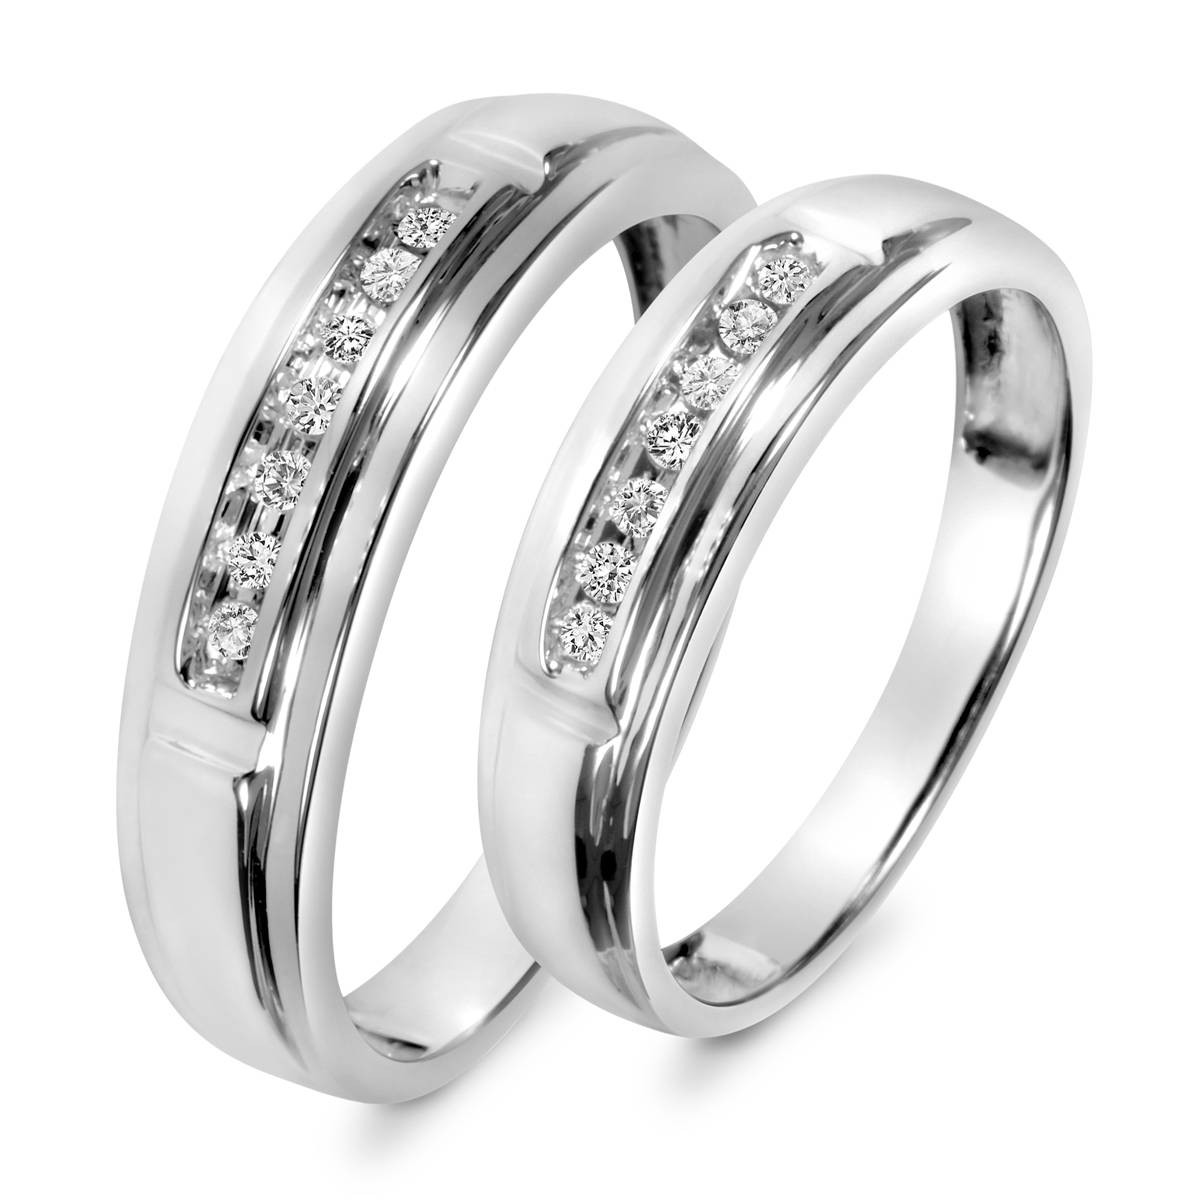 Matching Wedding Band Sets
 15 Inspirations of Matching Wedding Bands Sets For His And Her